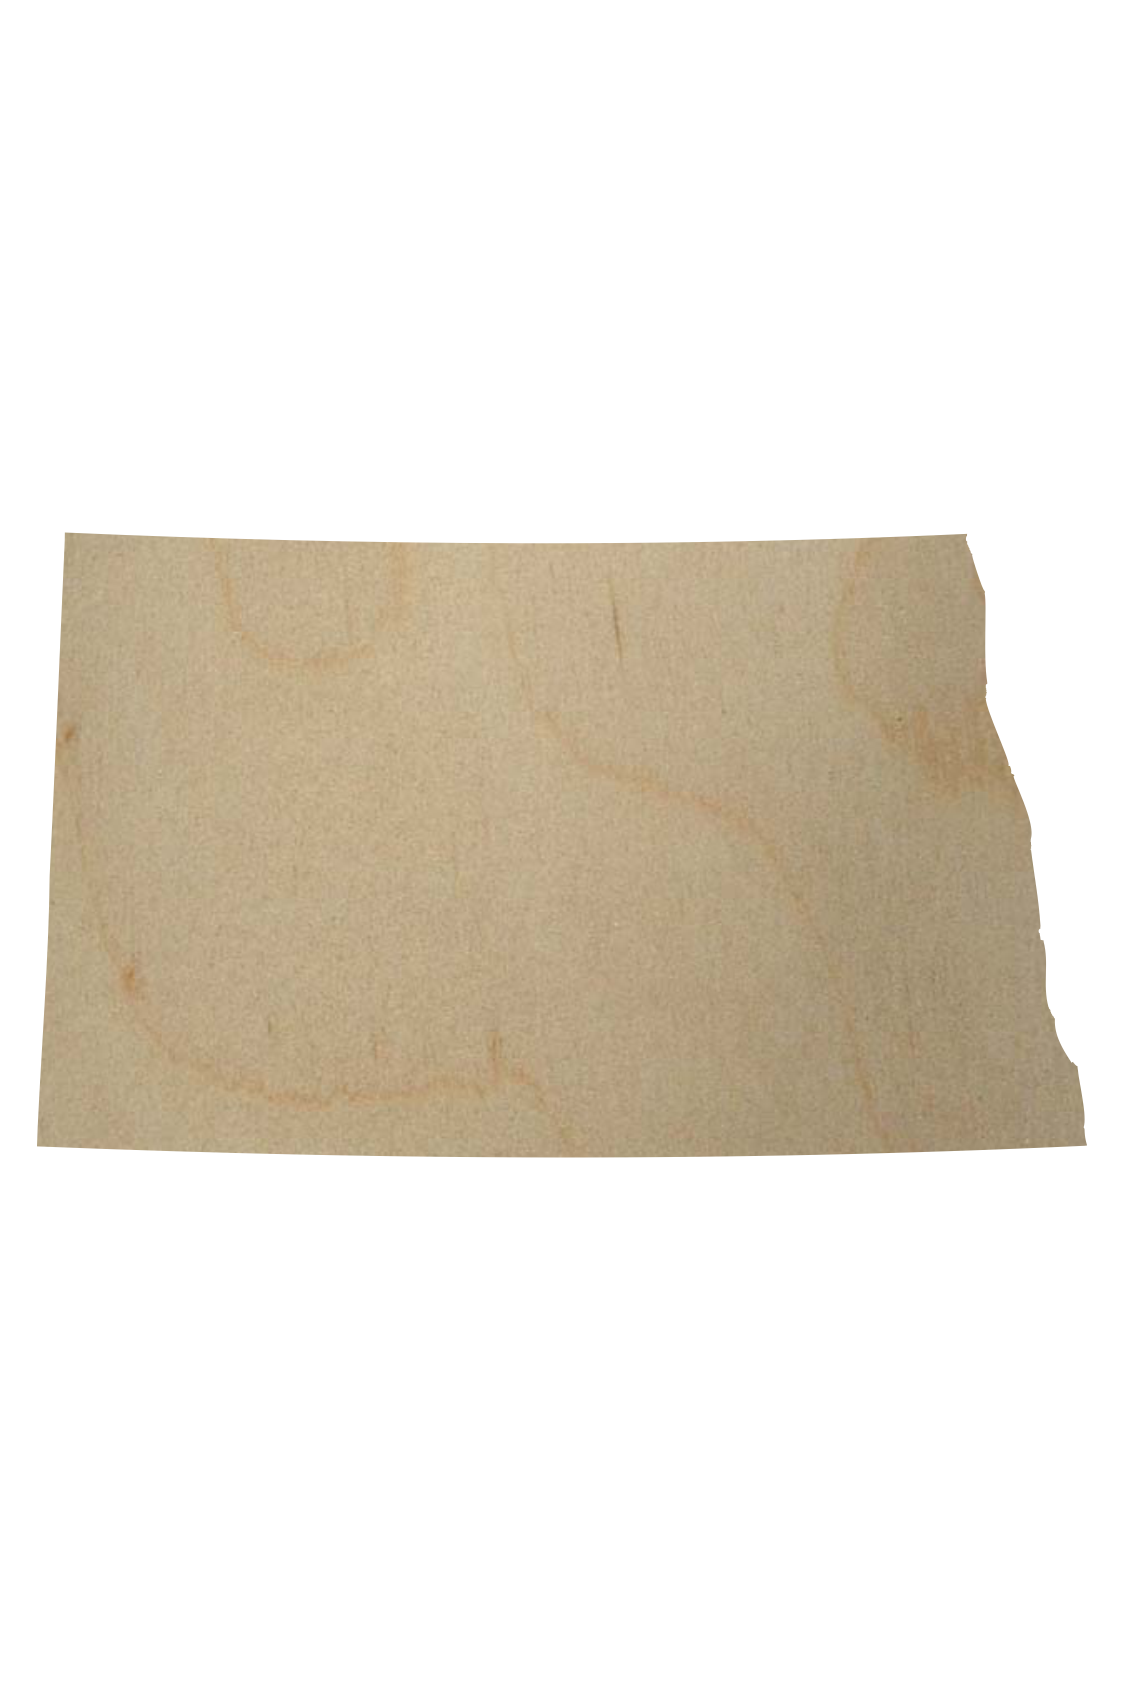 Wood Shape Material Rectangle Download HD PNG PNG Image